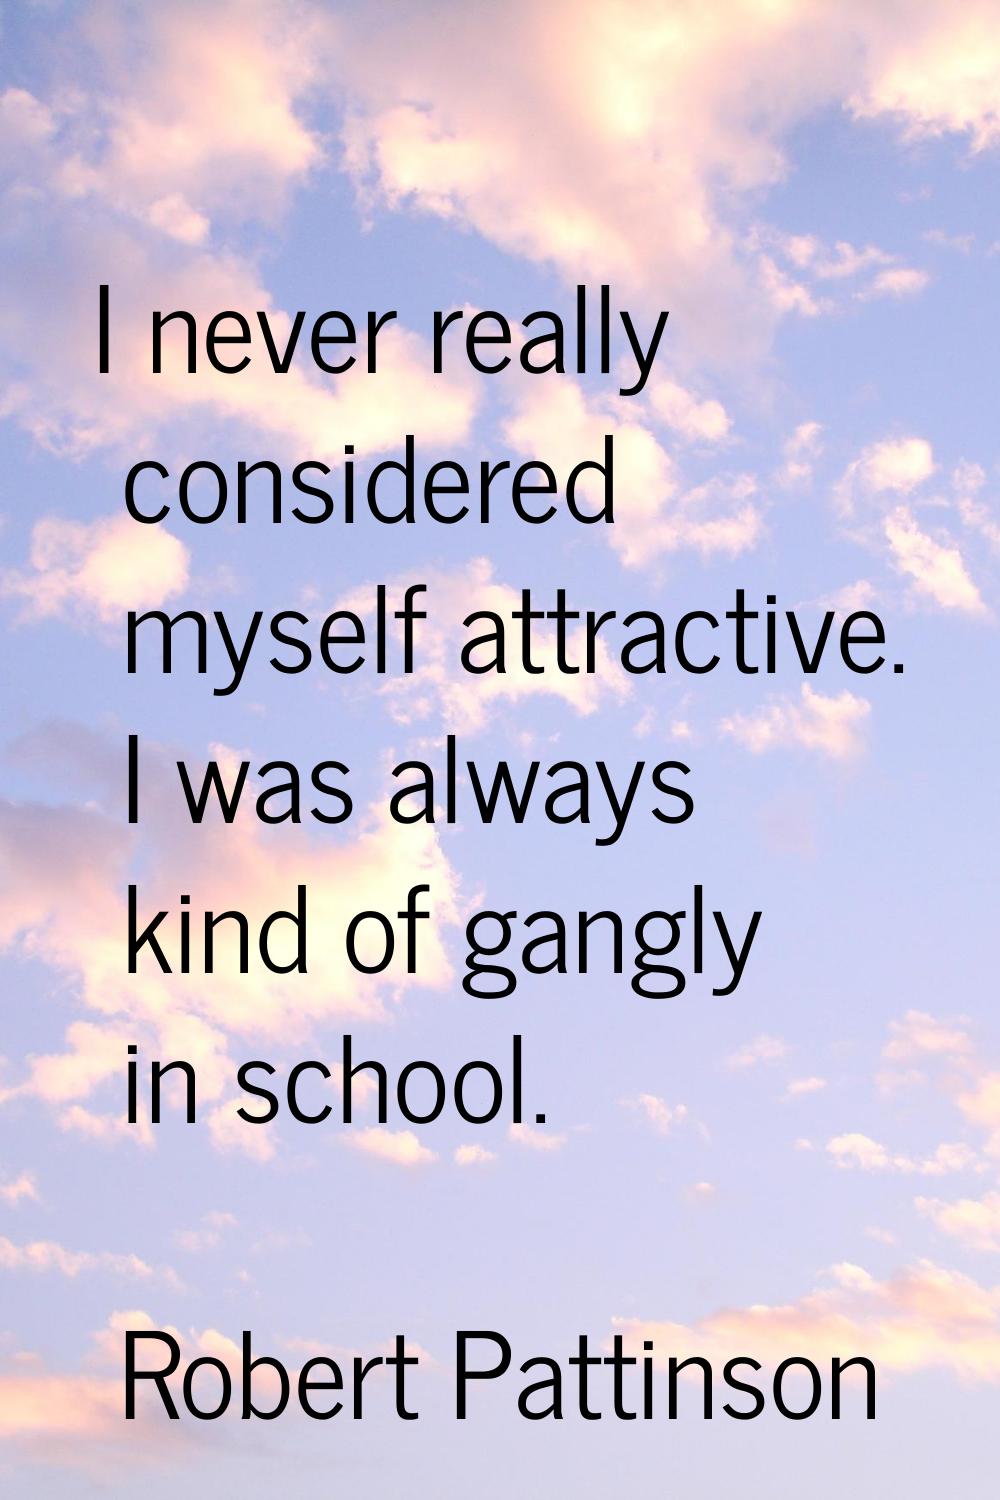 I never really considered myself attractive. I was always kind of gangly in school.